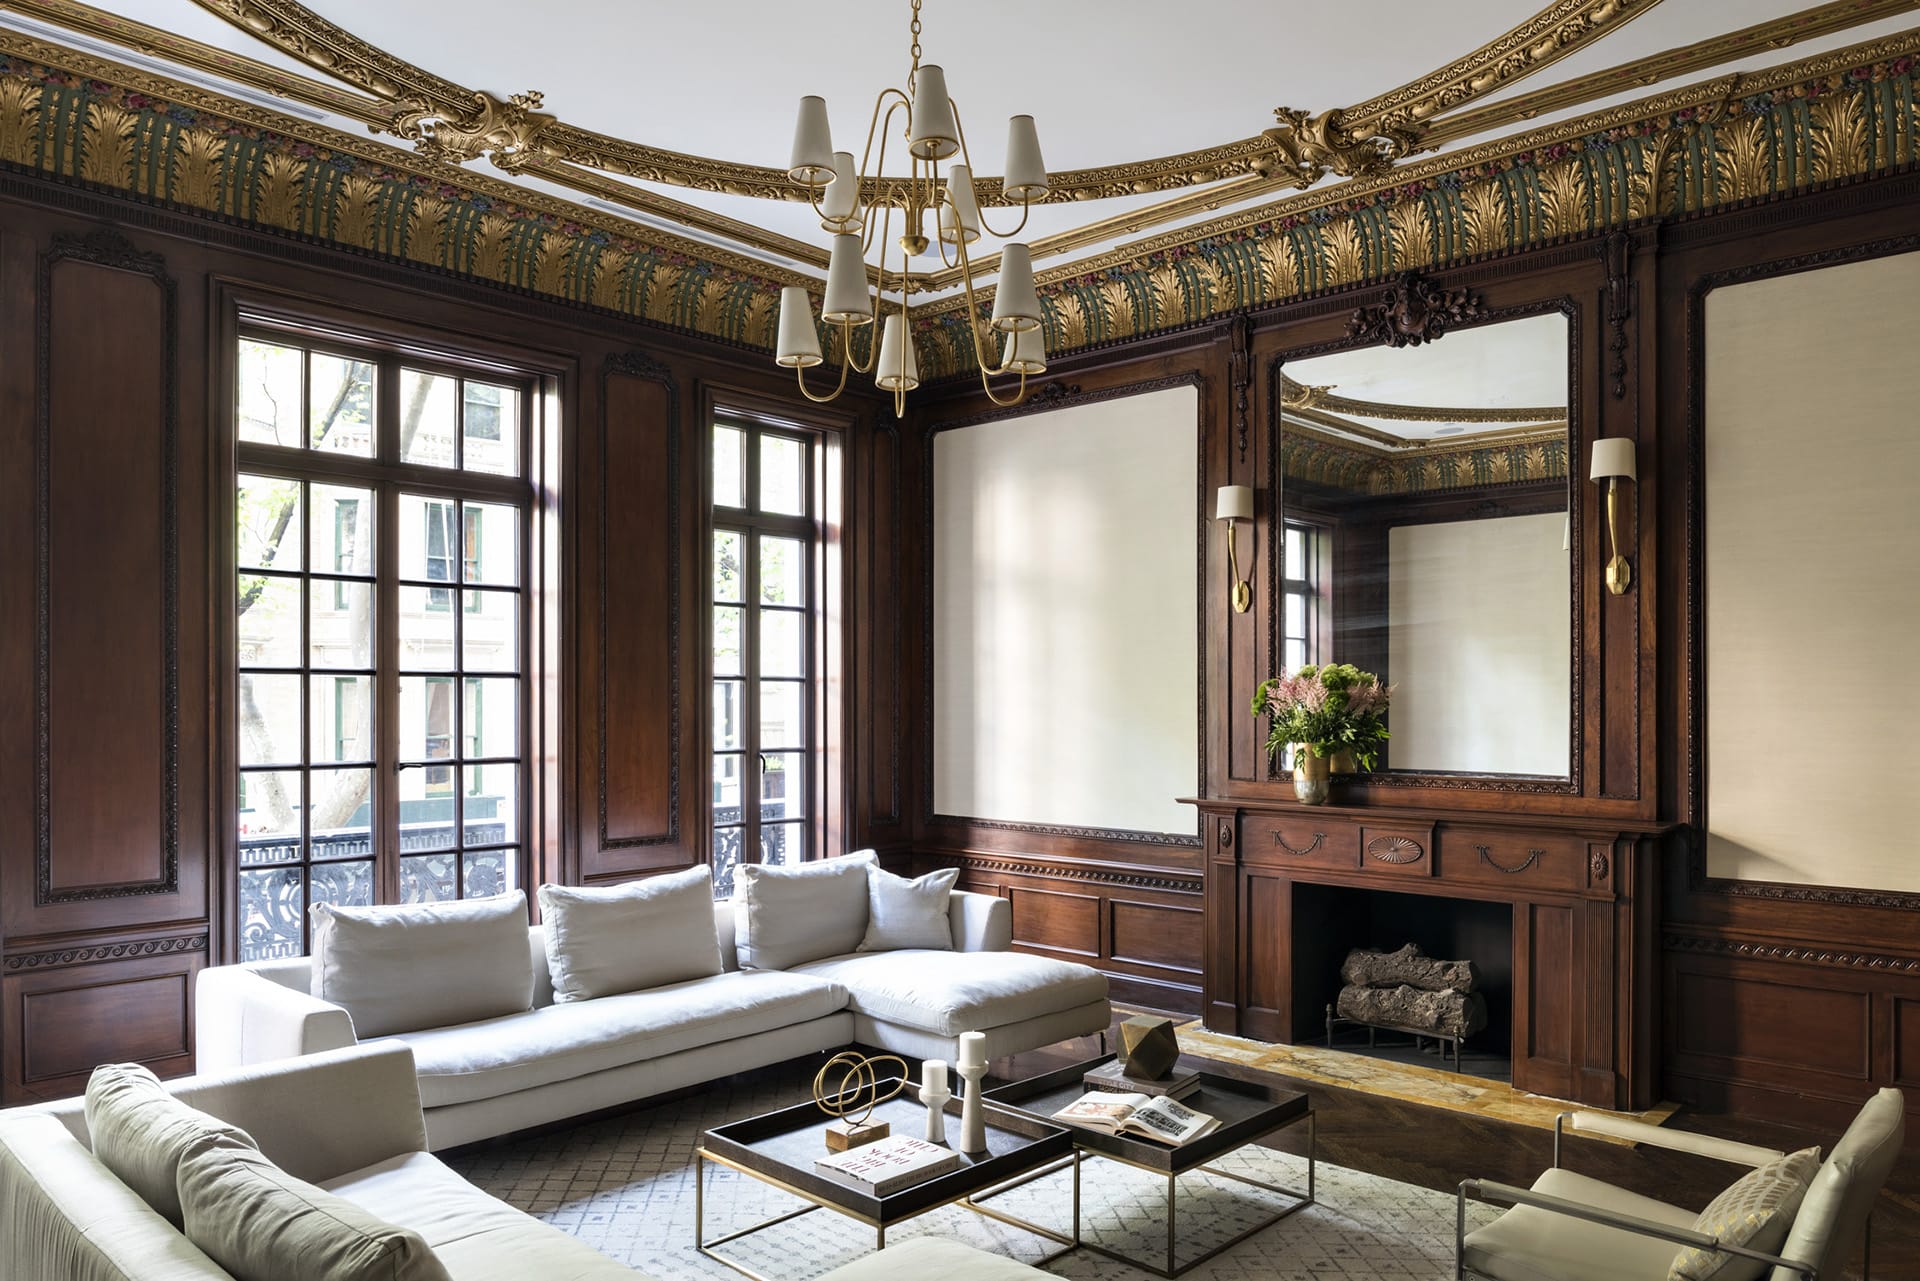 Living room with wood paneling, contemporary furnishings, and gold detailing on the ceiling and crown molding